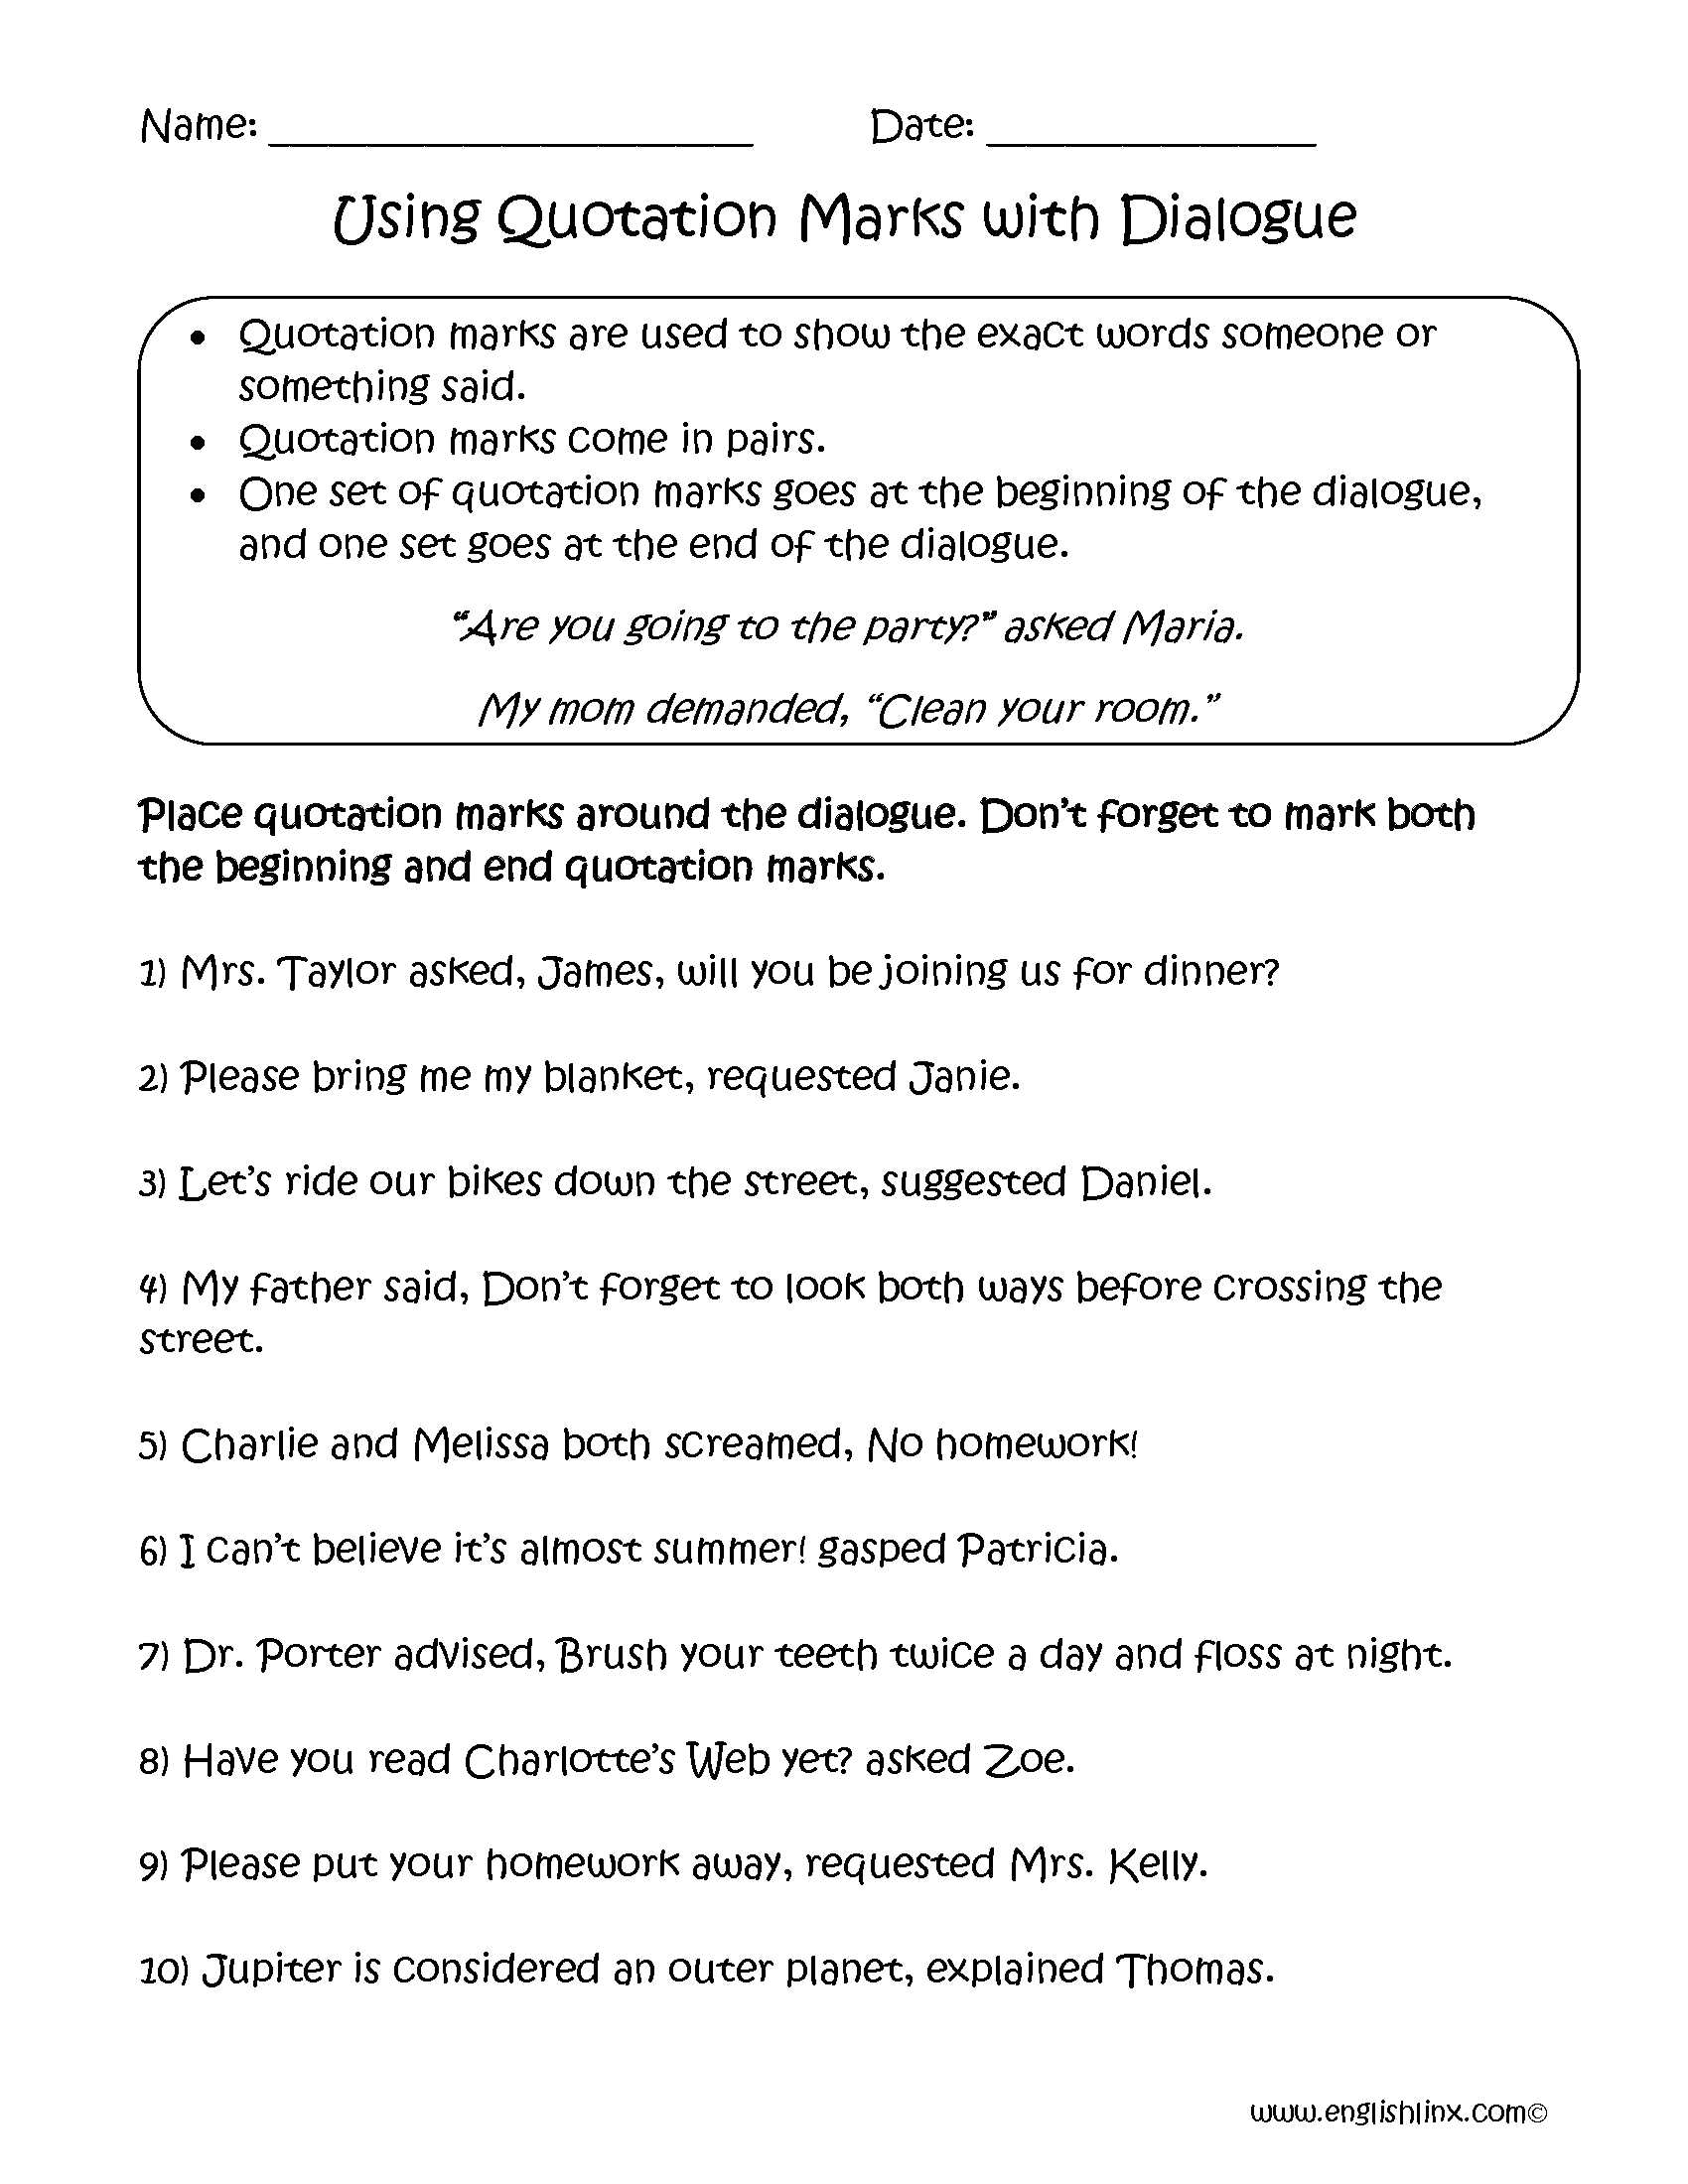 Review and Reinforce Worksheet Answers as Well as Adding Quotation Marks to Dialogue Worksheet